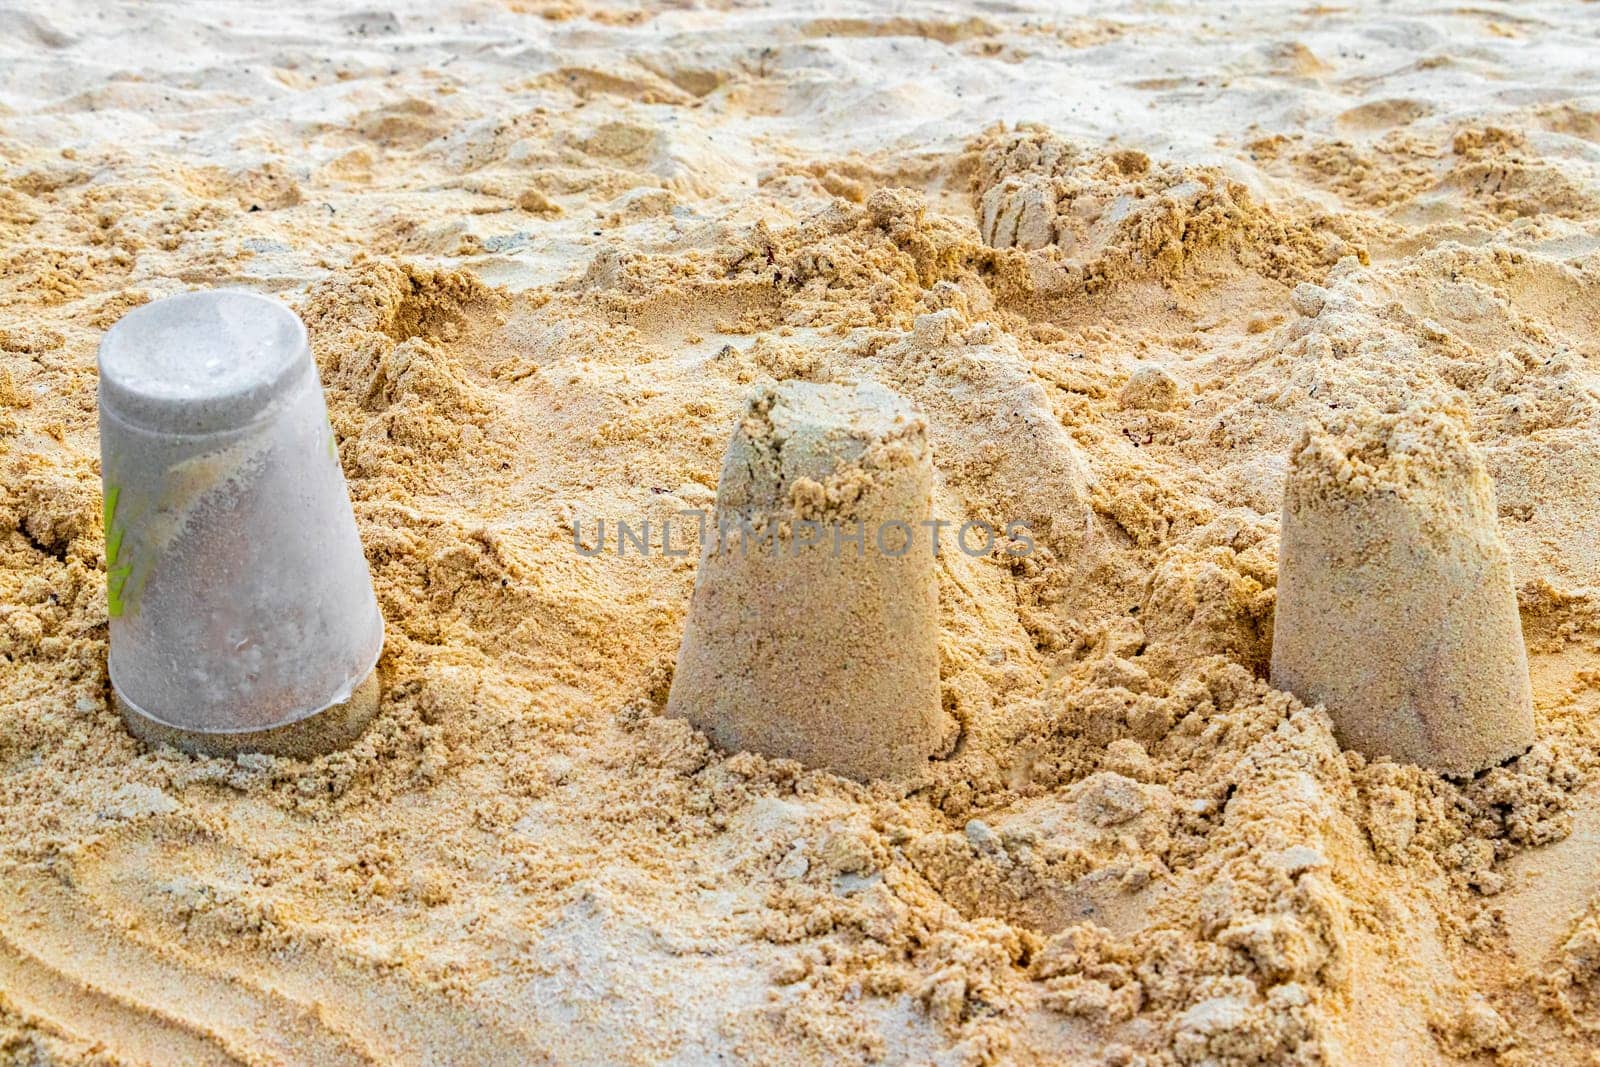 Castle made of white sand with buckets on the beach in Playa del Carmen Quintana Roo Mexico.